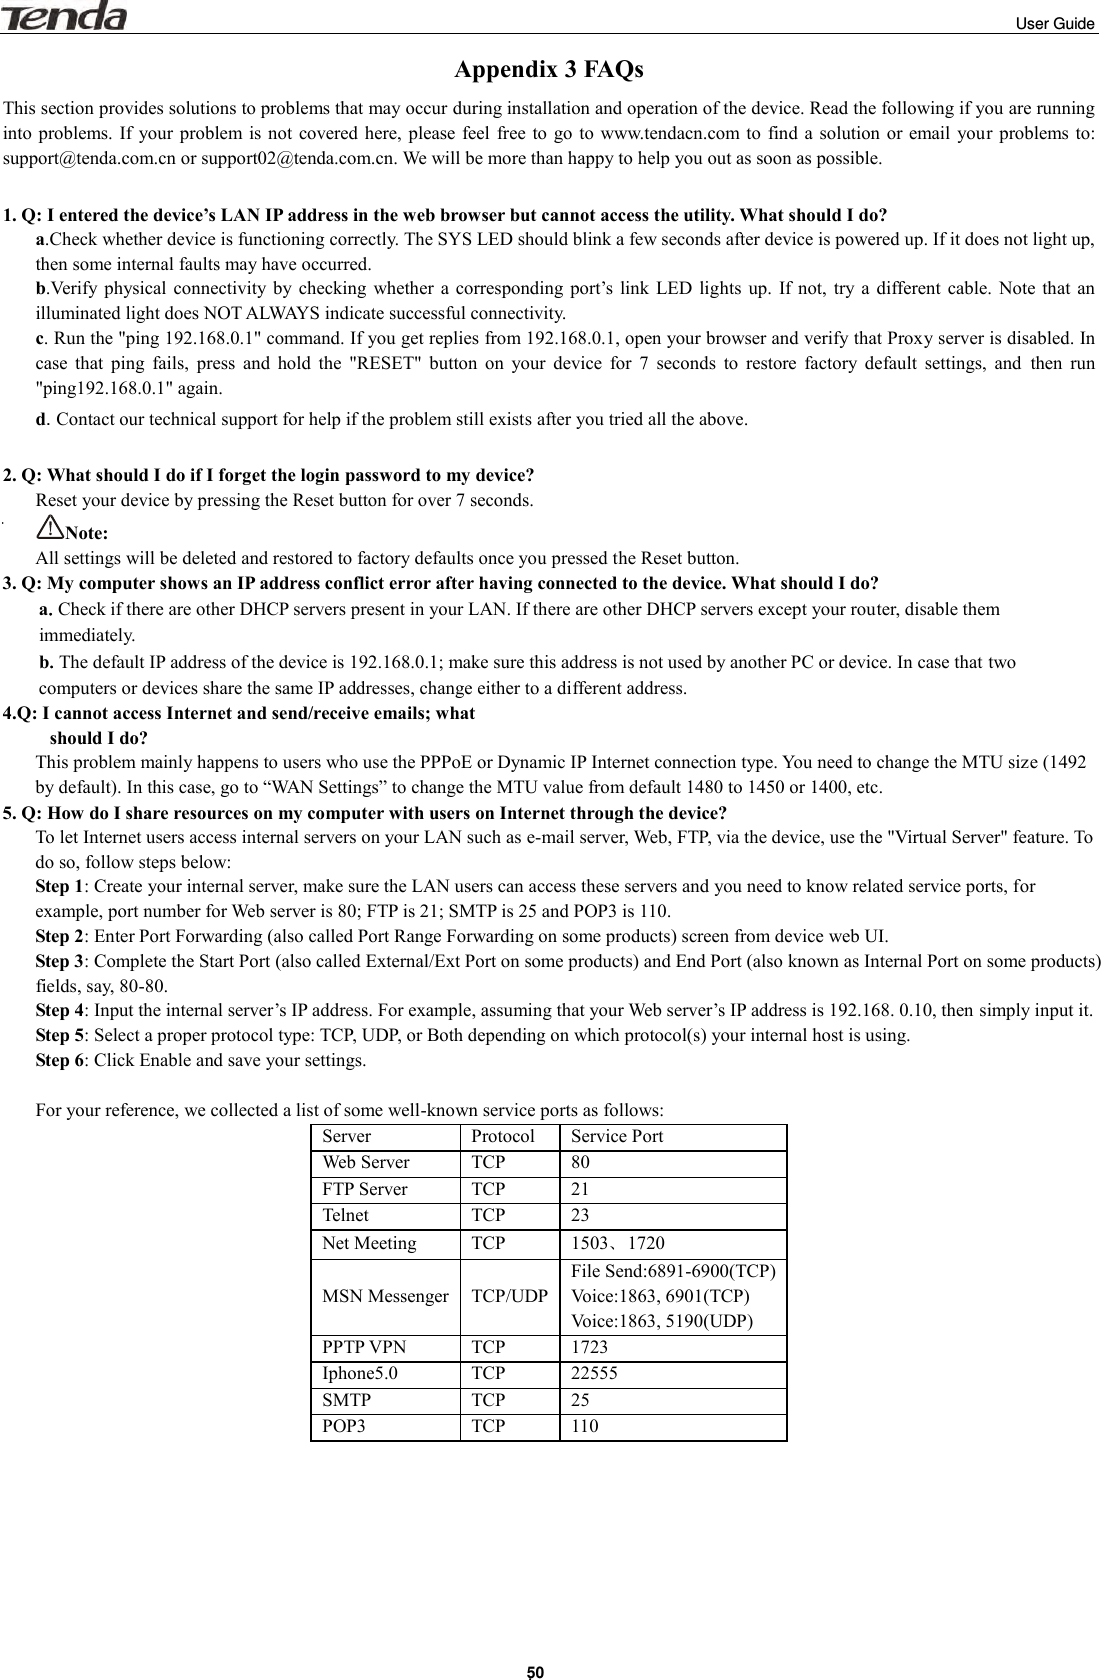                                                                                                                                                                                                                         User Guide . 50 Appendix 3 FAQs This section provides solutions to problems that may occur during installation and operation of the device. Read the following if you are running into problems. If  your problem is  not covered here, please feel  free to go to  www.tendacn.com to  find a solution  or email  your  problems to: support@tenda.com.cn or support02@tenda.com.cn. We will be more than happy to help you out as soon as possible.  1. Q: I entered the device’s LAN IP address in the web browser but cannot access the utility. What should I do? a.Check whether device is functioning correctly. The SYS LED should blink a few seconds after device is powered up. If it does not light up, then some internal faults may have occurred. b.Verify physical  connectivity  by  checking  whether  a  corresponding  port’s  link  LED  lights  up.  If not,  try  a  different cable.  Note  that  an illuminated light does NOT ALWAYS indicate successful connectivity. c. Run the &quot;ping 192.168.0.1&quot; command. If you get replies from 192.168.0.1, open your browser and verify that Proxy server is disabled. In case  that  ping  fails,  press  and  hold  the  &quot;RESET&quot;  button  on  your  device  for  7  seconds  to  restore  factory  default  settings,  and  then  run &quot;ping192.168.0.1&quot; again. d. Contact our technical support for help if the problem still exists after you tried all the above.  2. Q: What should I do if I forget the login password to my device? Reset your device by pressing the Reset button for over 7 seconds.   Note:   All settings will be deleted and restored to factory defaults once you pressed the Reset button. 3. Q: My computer shows an IP address conflict error after having connected to the device. What should I do? a.Check if there are other DHCP servers present in your LAN. If there are other DHCP servers except your router, disable them immediately. b.The default IP address of the device is 192.168.0.1; make sure this address is not used by another PC or device. In case that two computers or devices share the same IP addresses, change either to a different address. 4.Q: I cannot access Internet and send/receive emails; what   should I do? This problem mainly happens to users who use the PPPoE or Dynamic IP Internet connection type. You need to change the MTU size (1492 by default). In this case, go to “WAN Settings” to change the MTU value from default 1480 to 1450 or 1400, etc.     5. Q: How do I share resources on my computer with users on Internet through the device? To let Internet users access internal servers on your LAN such as e-mail server, Web, FTP, via the device, use the &quot;Virtual Server&quot; feature. To do so, follow steps below: Step 1: Create your internal server, make sure the LAN users can access these servers and you need to know related service ports, for example, port number for Web server is 80; FTP is 21; SMTP is 25 and POP3 is 110. Step 2: Enter Port Forwarding (also called Port Range Forwarding on some products) screen from device web UI. Step 3: Complete the Start Port (also called External/Ext Port on some products) and End Port (also known as Internal Port on some products) fields, say, 80-80. Step 4: Input the internal server’s IP address. For example, assuming that your Web server’s IP address is 192.168. 0.10, then simply input it. Step 5: Select a proper protocol type: TCP, UDP, or Both depending on which protocol(s) your internal host is using. Step 6: Click Enable and save your settings.  For your reference, we collected a list of some well-known service ports as follows: Server Protocol Service Port Web Server TCP 80 FTP Server TCP 21 Telnet TCP 23 Net Meeting TCP 1503、1720 MSN Messenger TCP/UDP File Send:6891-6900(TCP) Voice:1863, 6901(TCP) Voice:1863, 5190(UDP) PPTP VPN TCP 1723 Iphone5.0 TCP 22555 SMTP TCP 25 POP3 TCP 110        